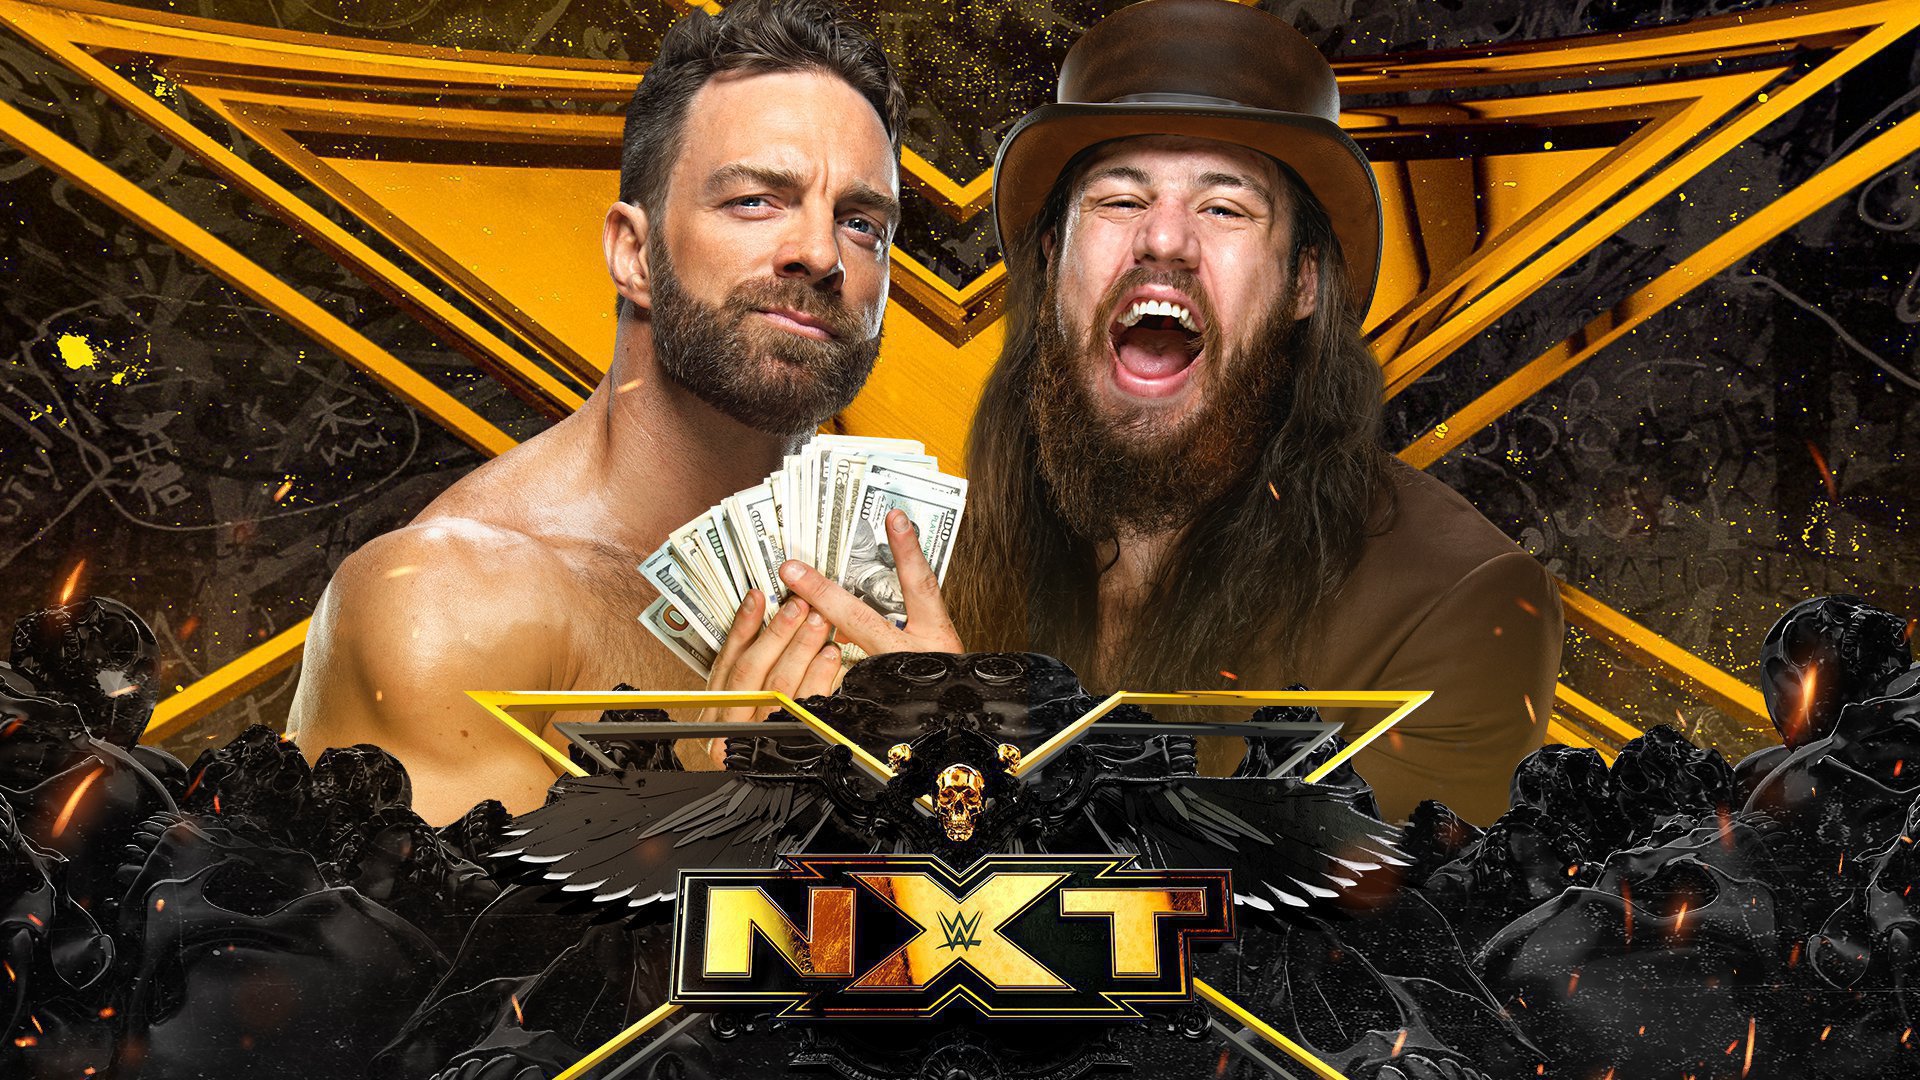 Episode Temporary 1 Wwe Nxt July 27 21 Sports